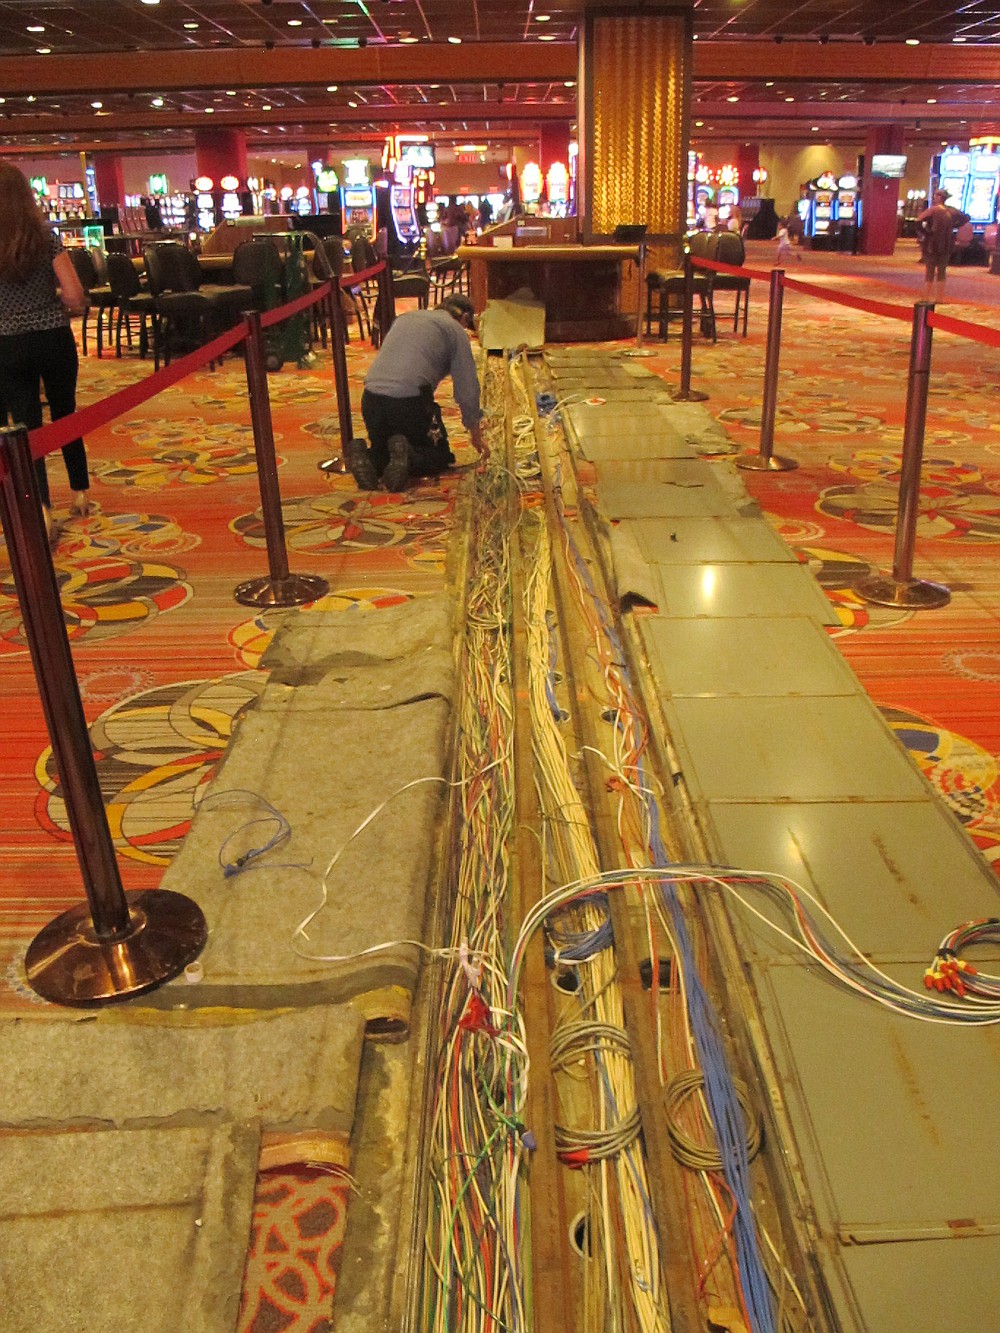 A worker inspects electrical cables on the casino floor of Bally's casino in Atlantic City N.J., Monday, June 14, 2021.  The new owners of Bally's Atlantic City are attempting to revive a comatose casino in perhaps the most cutthroat gambling market in America. Rhode Island-based Bally's Corporation is spending at least $90 million on the Boardwalk casino over the next five years, including hotel room makeovers, a renovation of the casino floor, new slot machines and restaurants, and more live entertainment.  (AP Photo/Wayne Parry)